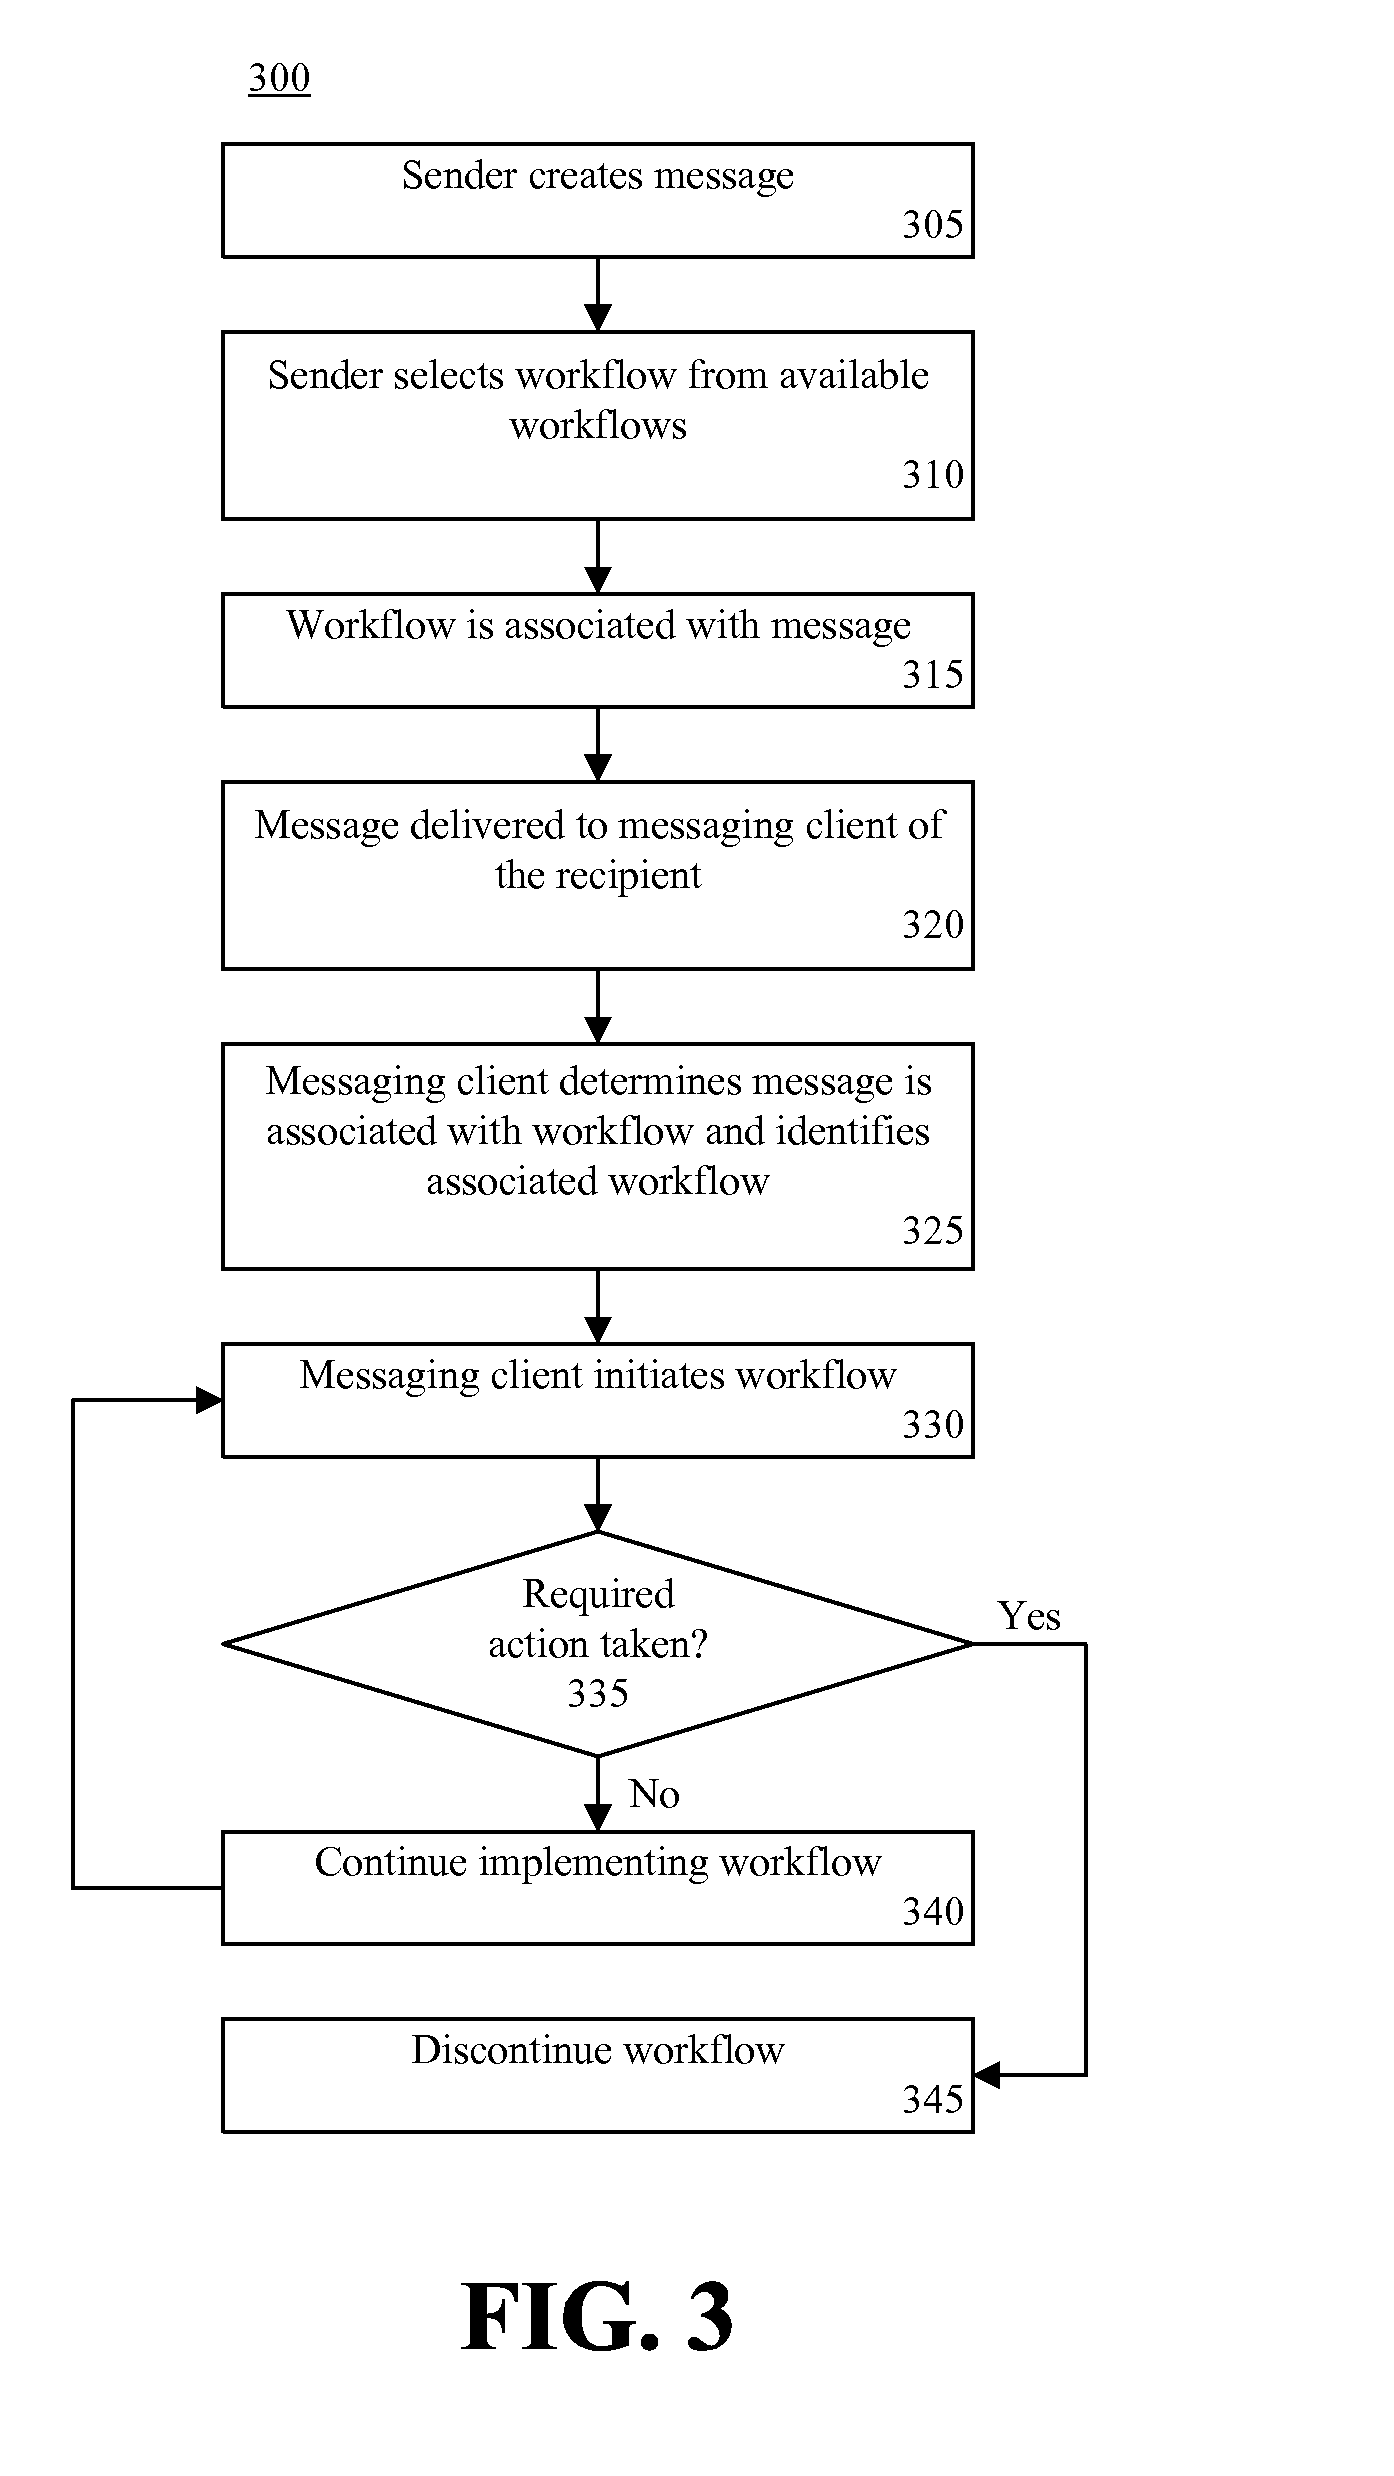 Modifying Behavior in Messaging Systems According to Organizational Hierarchy